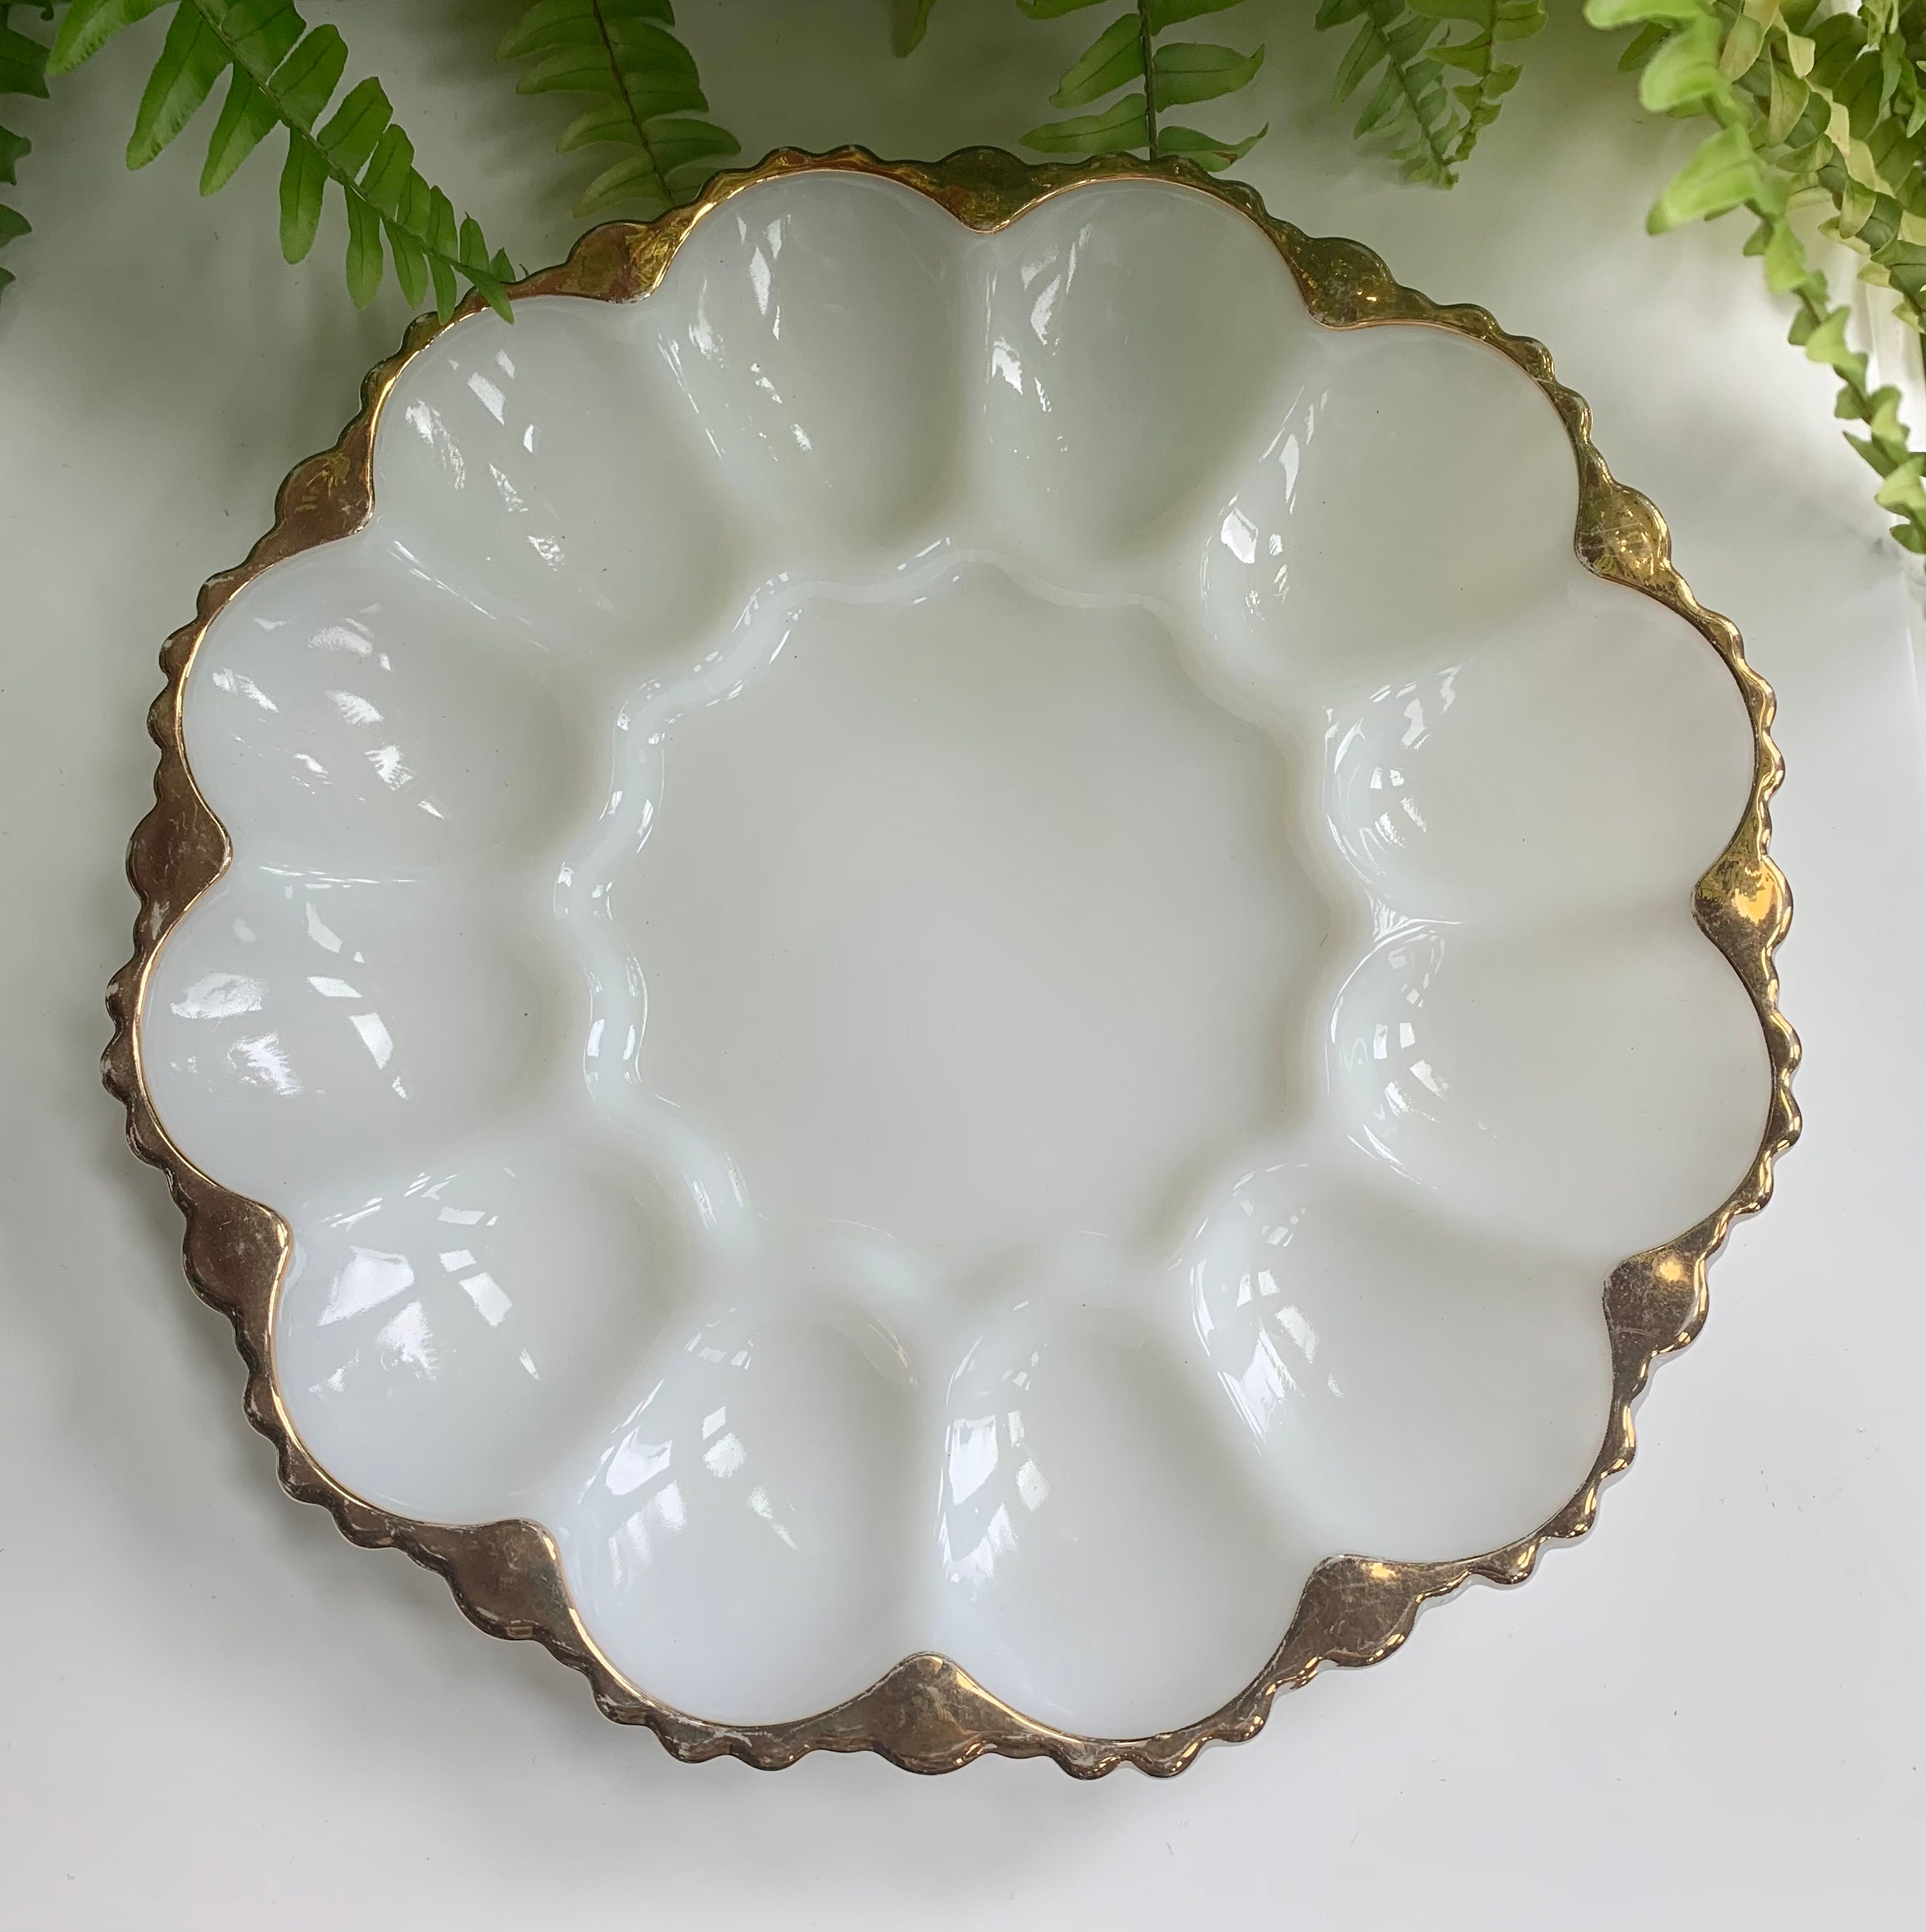 Buy Usa Egg Plate Online In India Etsy India